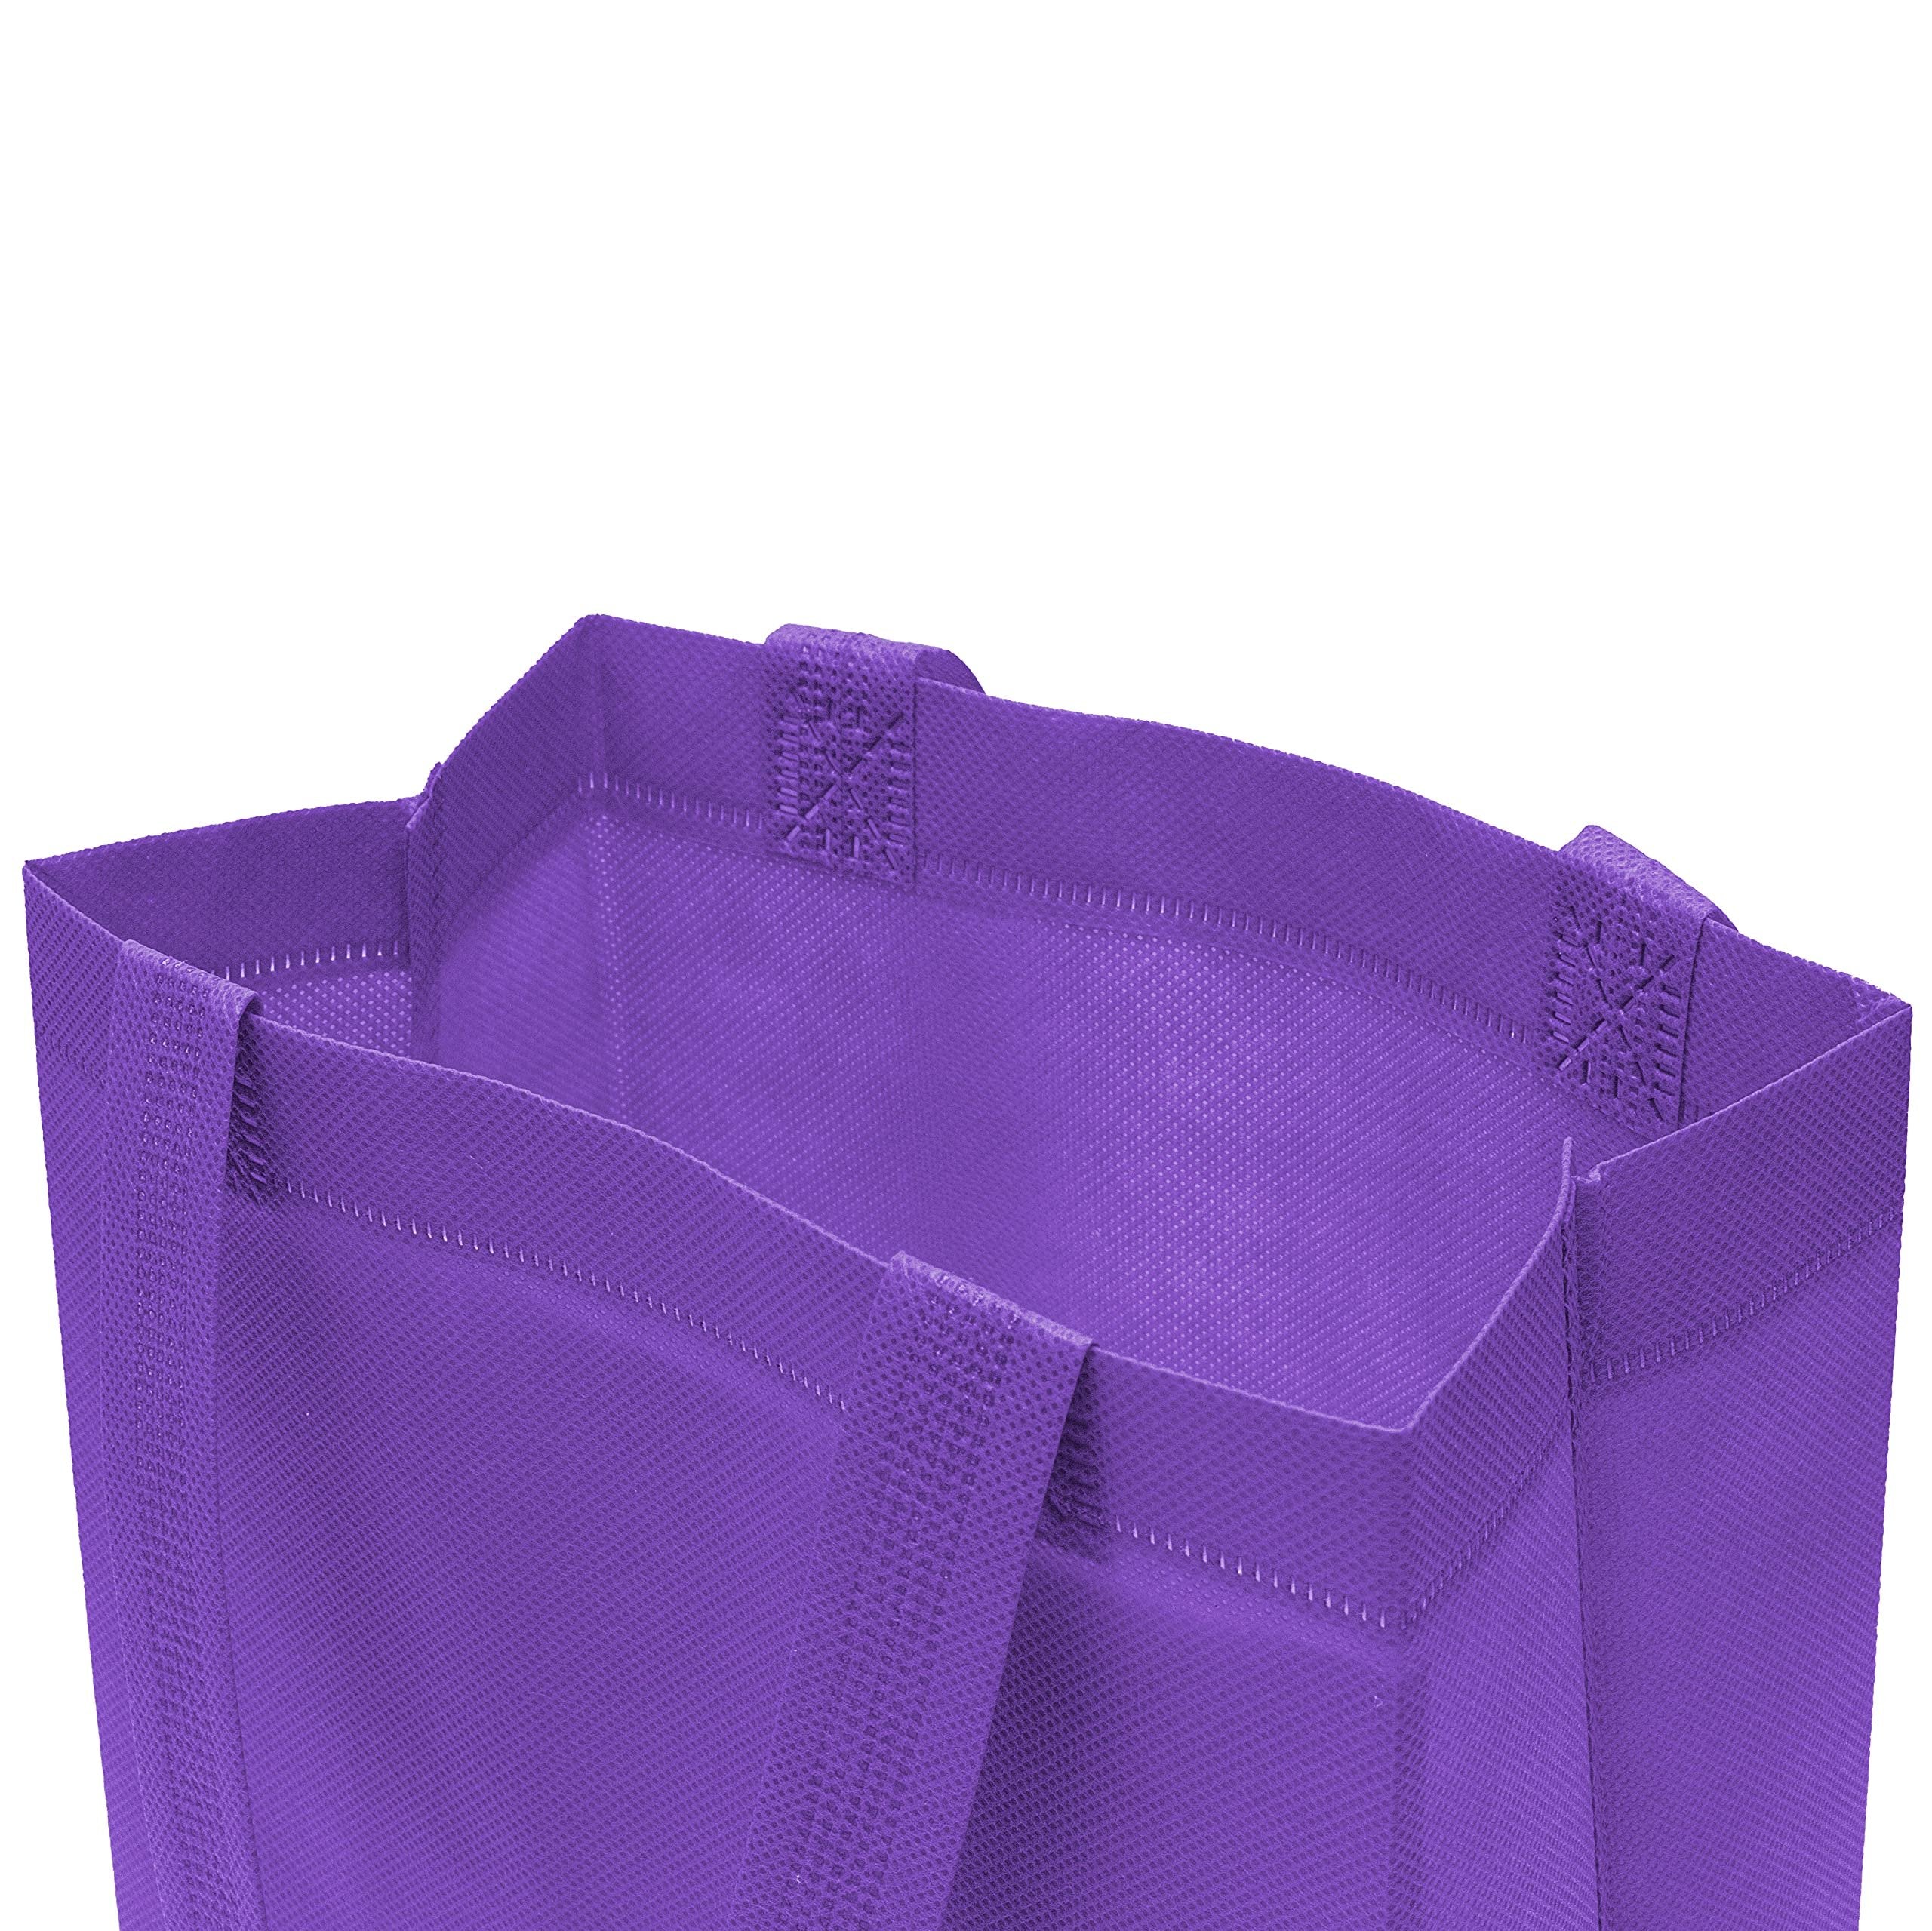 Reusable Gift Bags - 12 Pack Small Totes, Eco-Friendly Fabric - Assorted Colors - 8x4x10 Inches